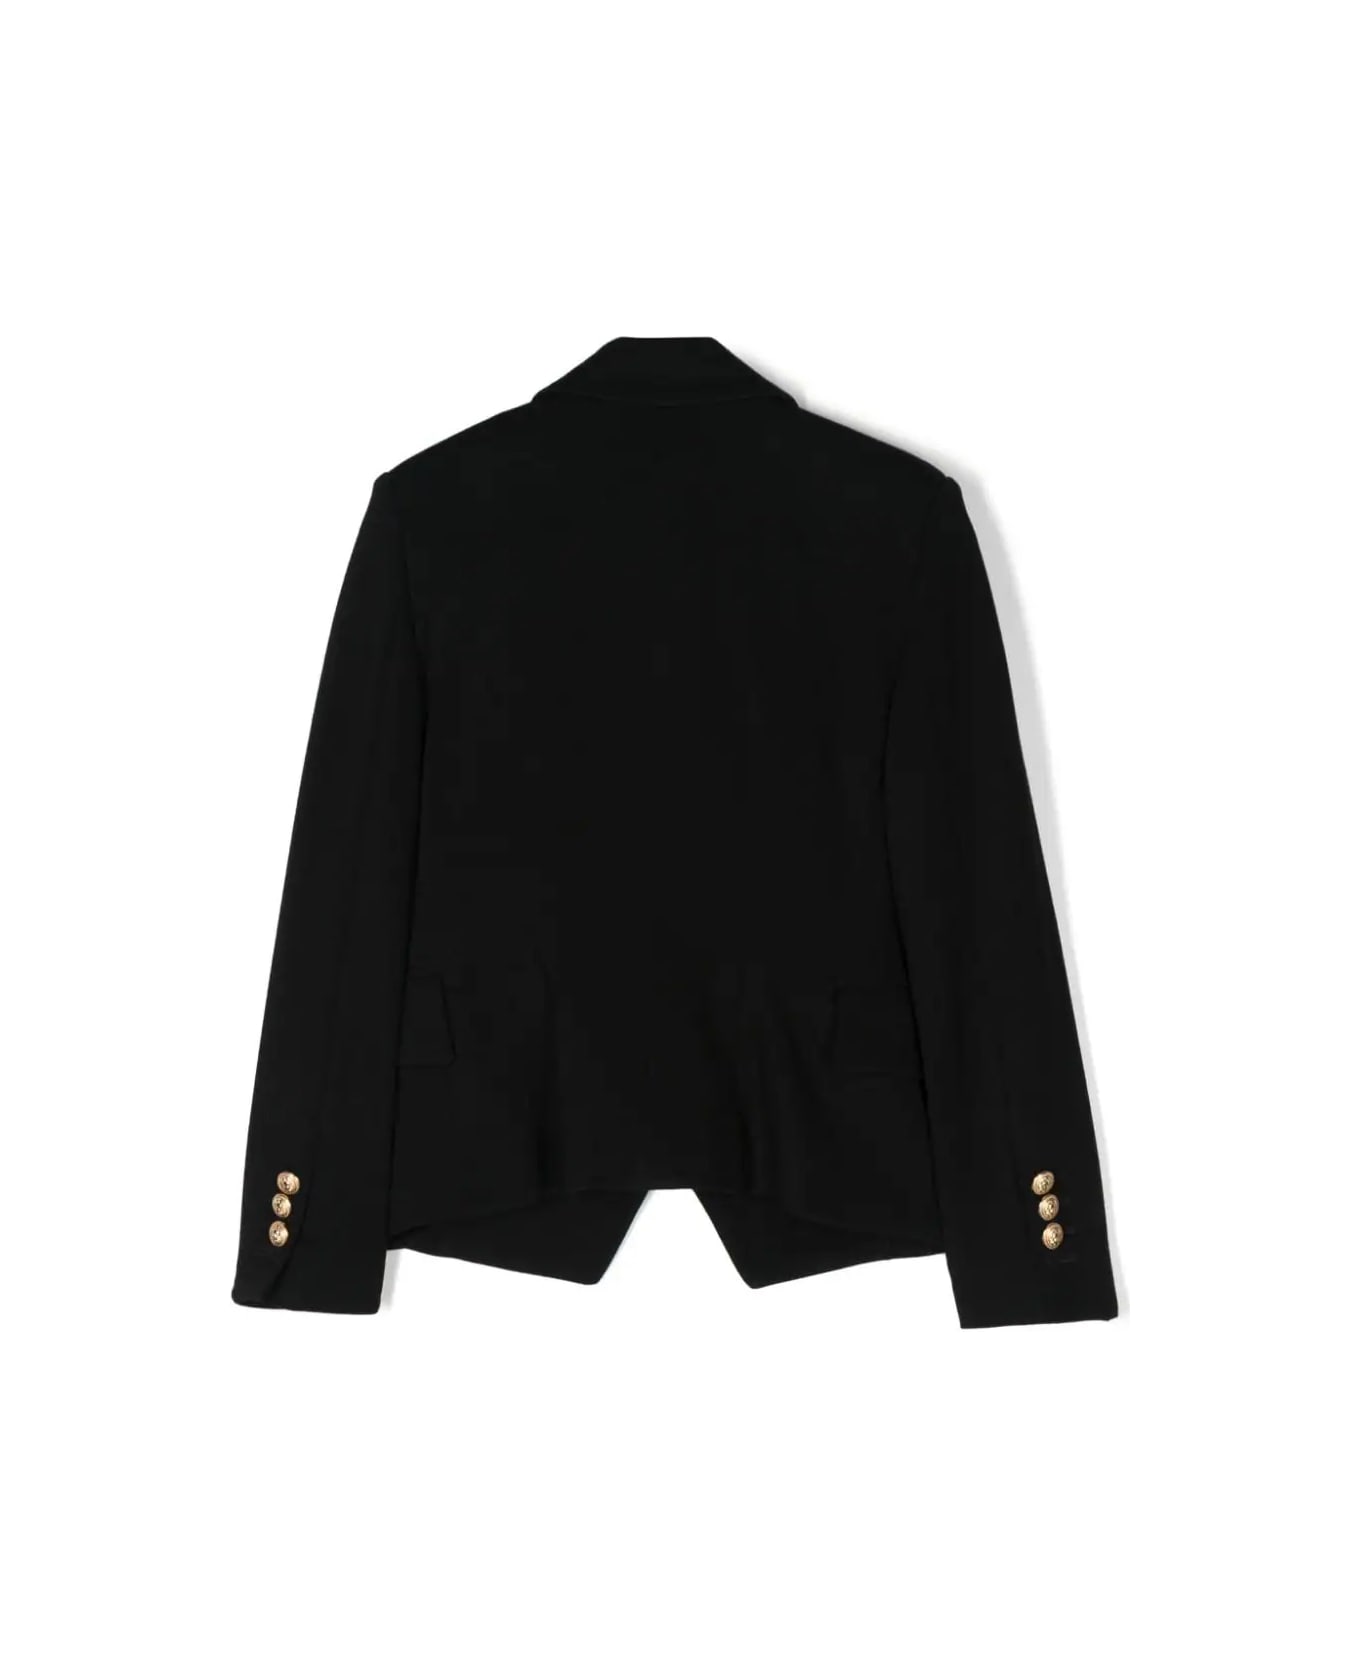 Balmain Black Double-breasted Blazer With Gold Buttons - Black コート＆ジャケット